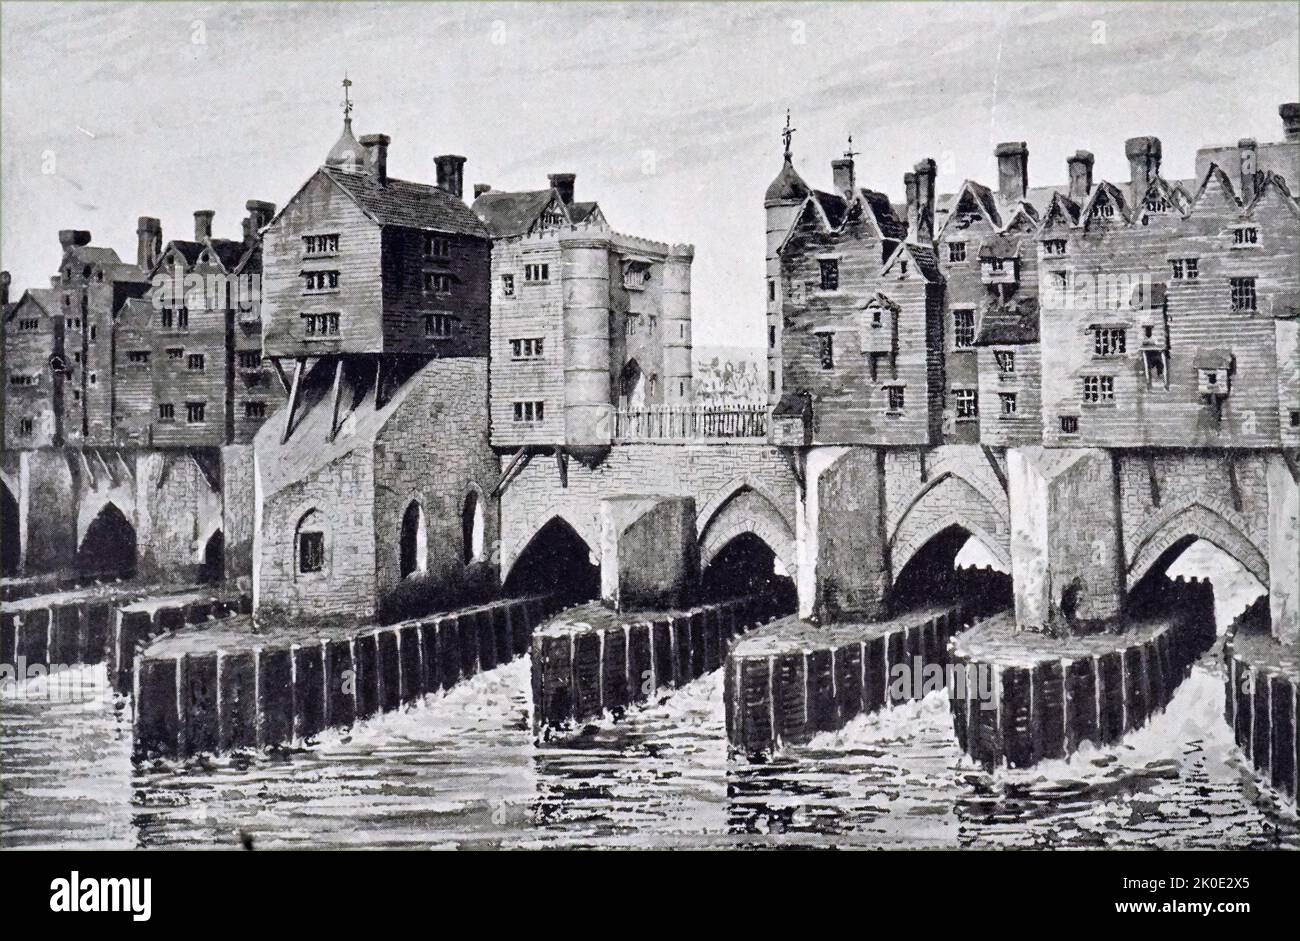 Old London Bridge, showing London Square and remains of St Thomas's Chapel. From a model by John B Thorp in the London Museum. John Thorpe or Thorp (c.1565-1655) was an English architect. Stock Photo